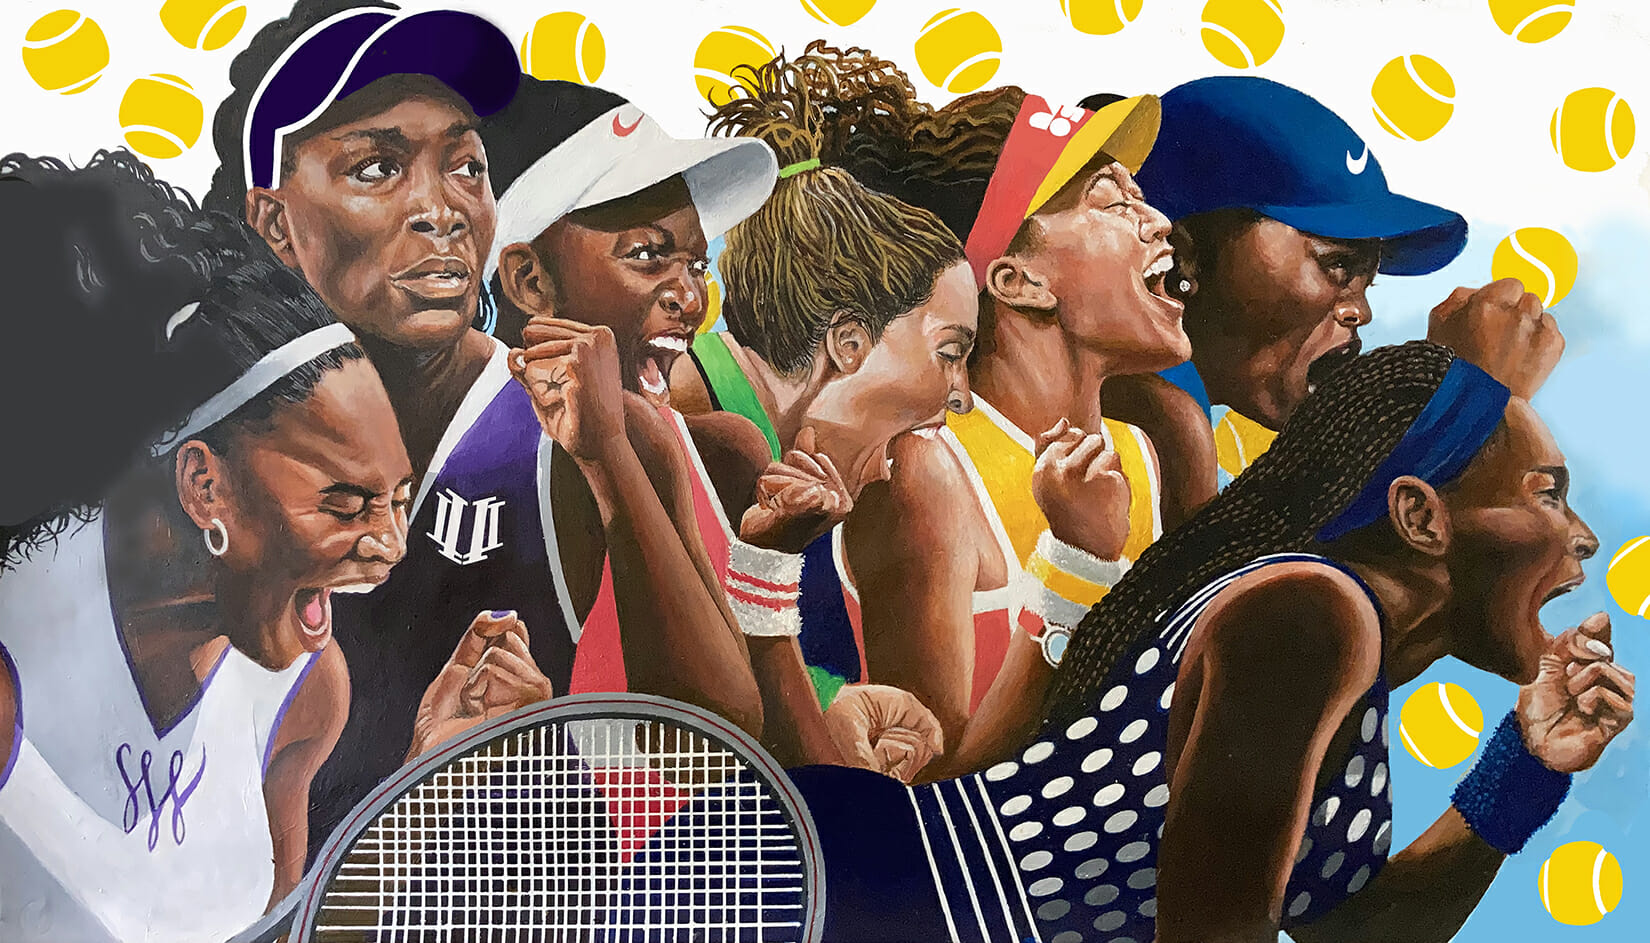 Artwork featuring 7 Black tennis players victoriously cheering after a win